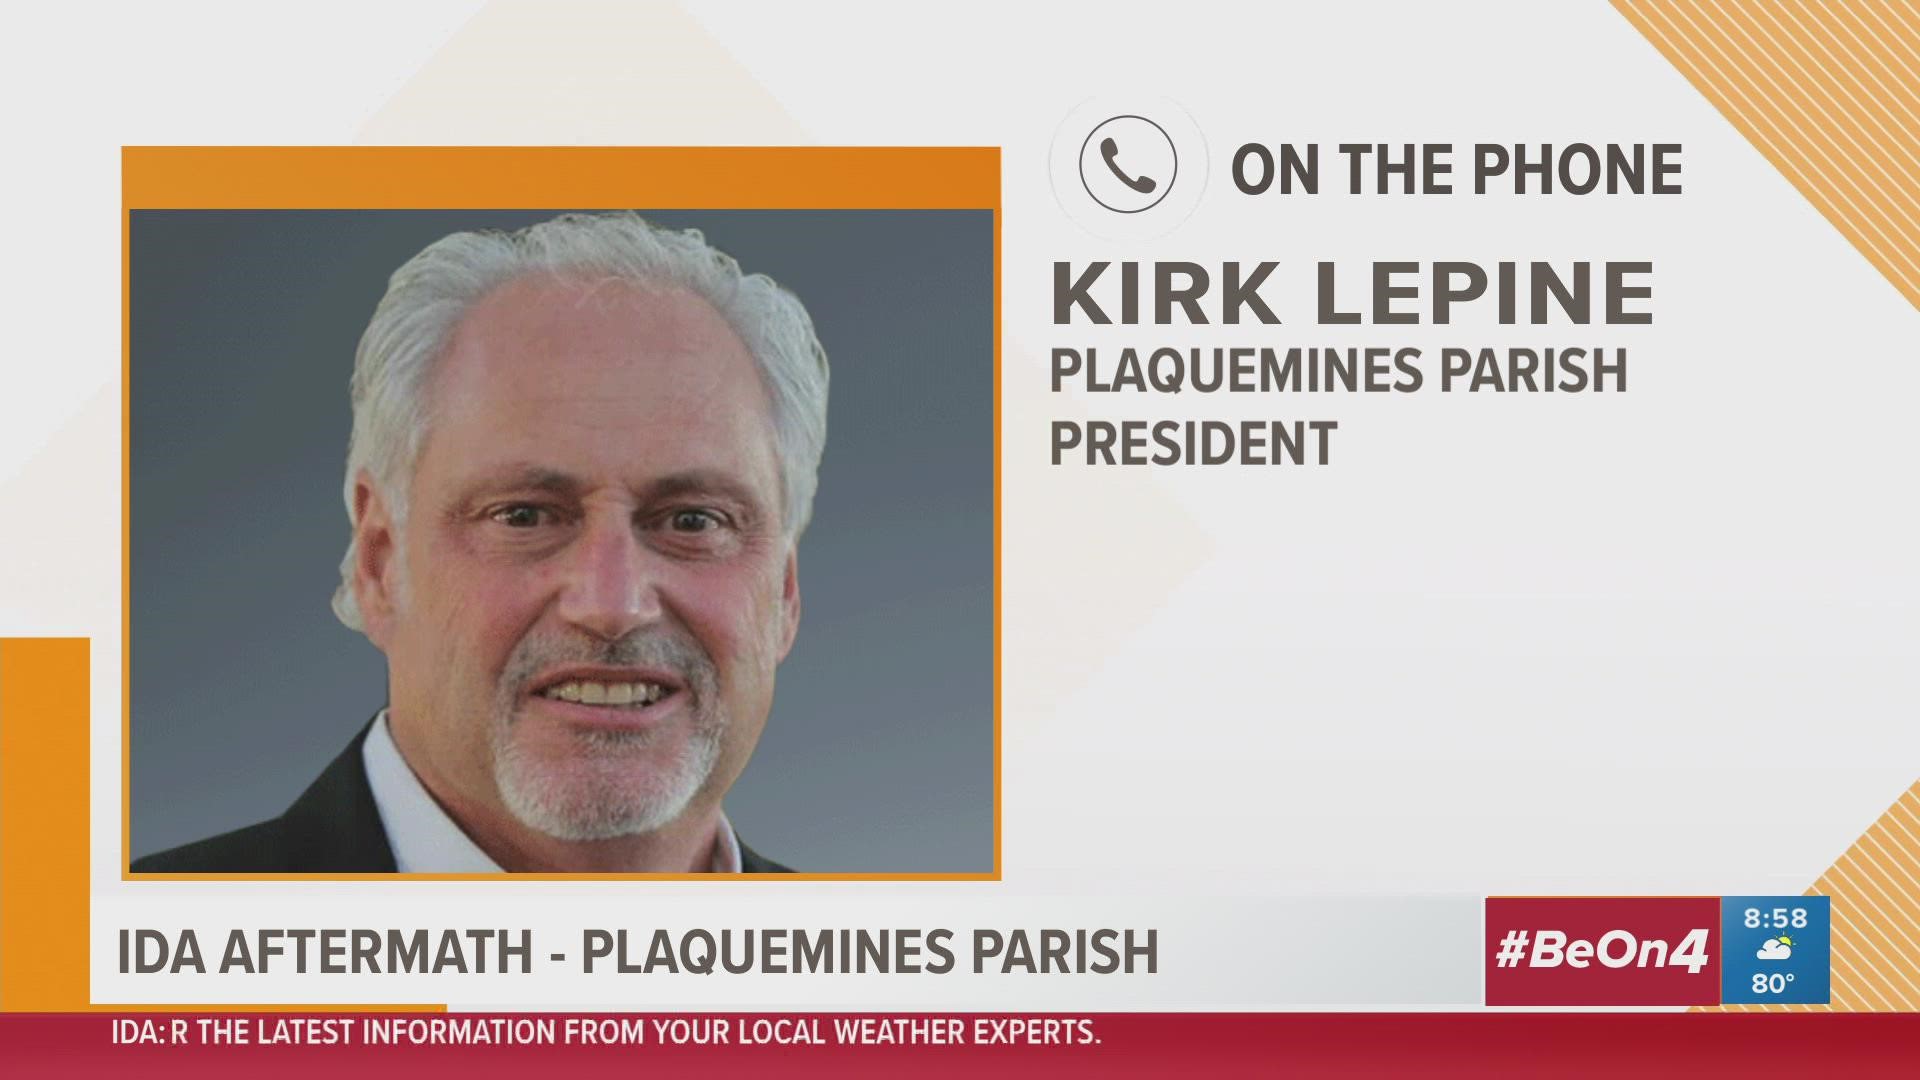 Kirk Lepine, Plaquemines Parish President, details what's going on in the area and what residents can expect in the coming day.s